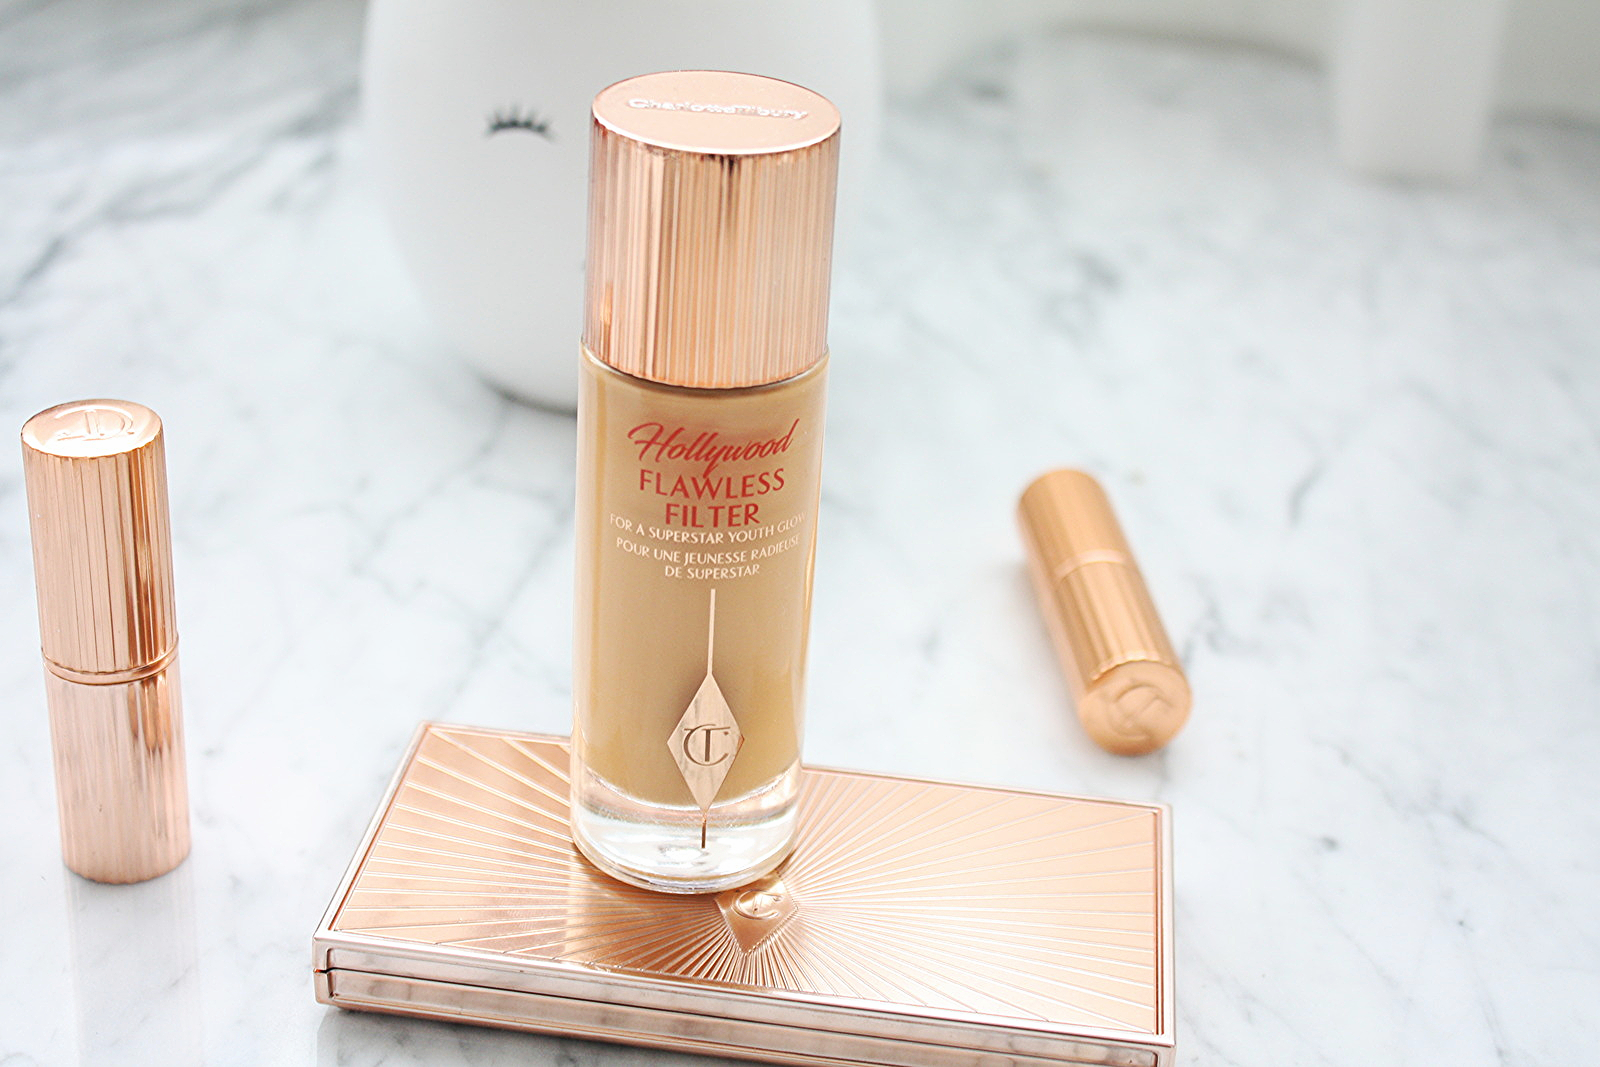 products like charlotte tilbury flawless filter